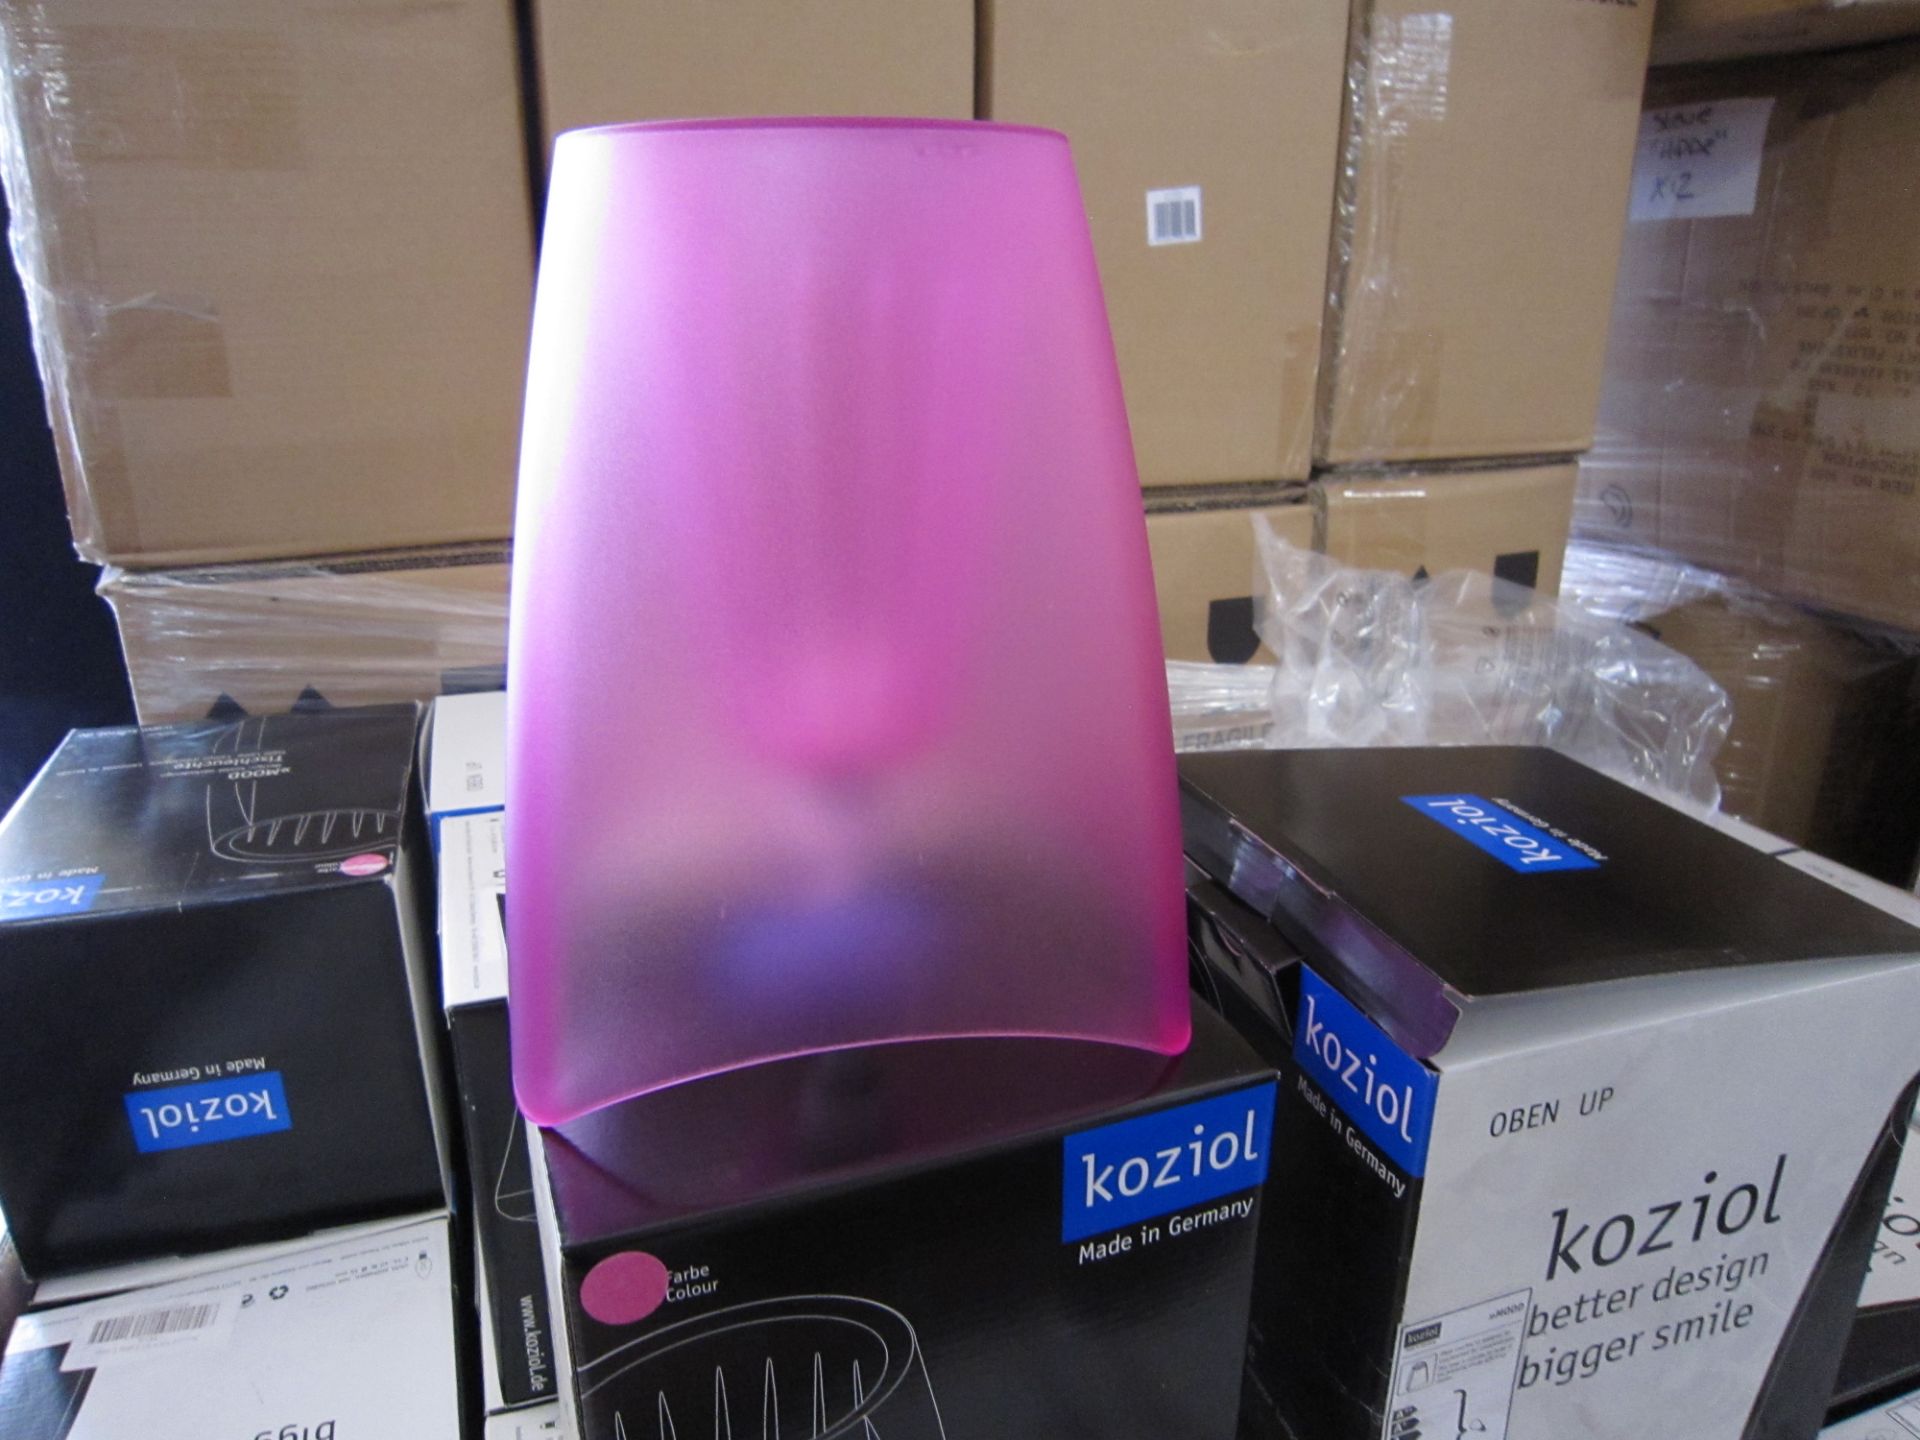 80pcs - Brand new light pink kozoi - German manufactured pendant light with fittings - brand new and - Image 3 of 3